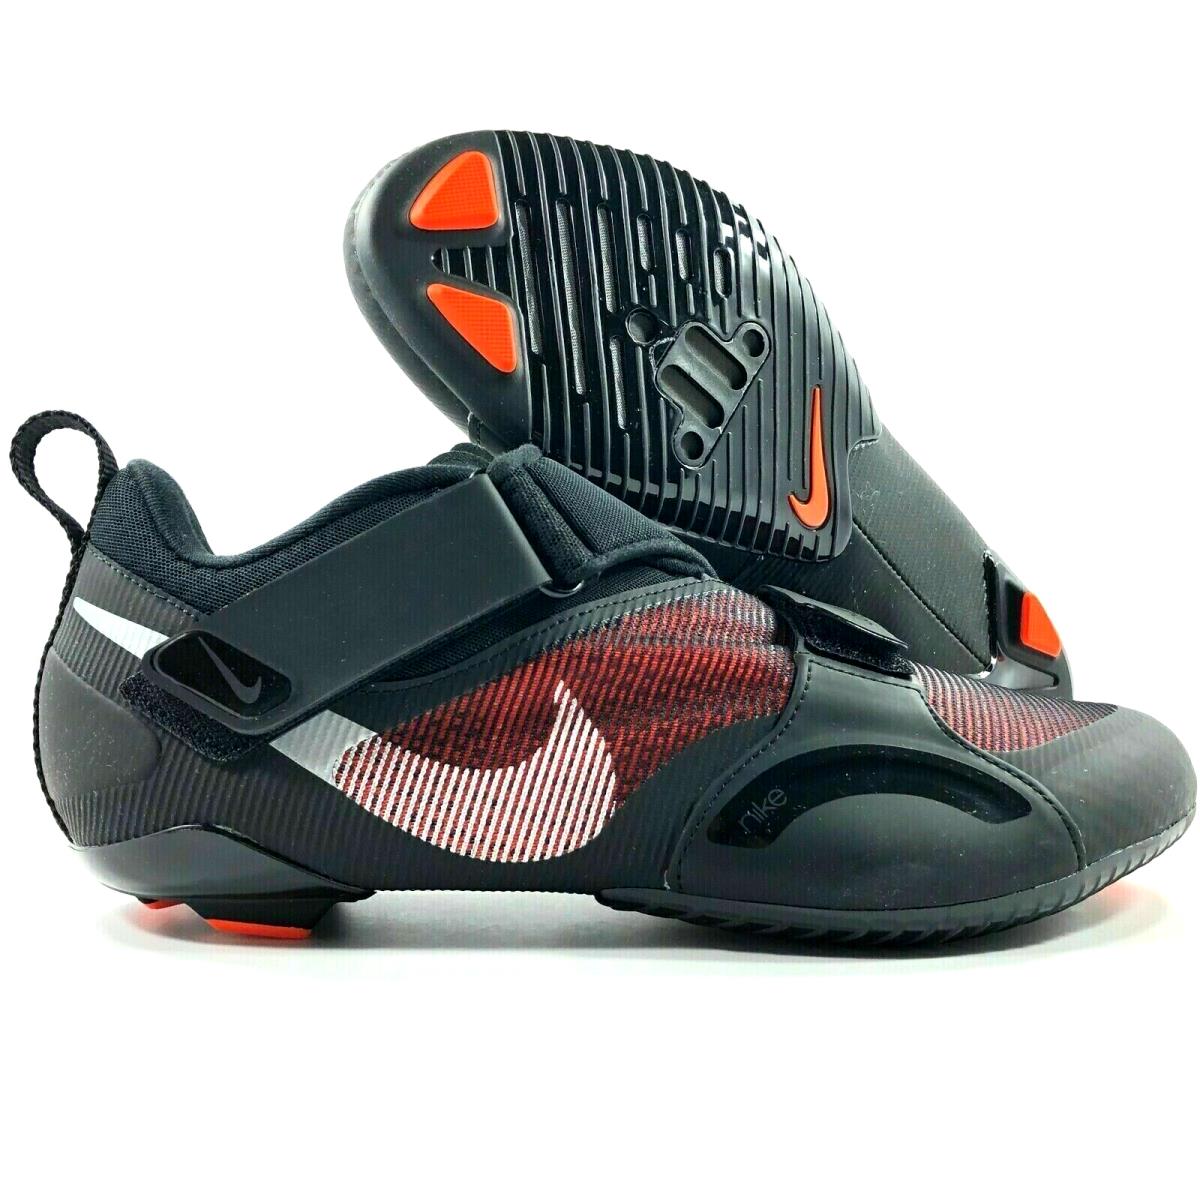 Nike Superrep Cycle Shoes sz 12 Black Silver Crimson Indoor Cycling Pro Super